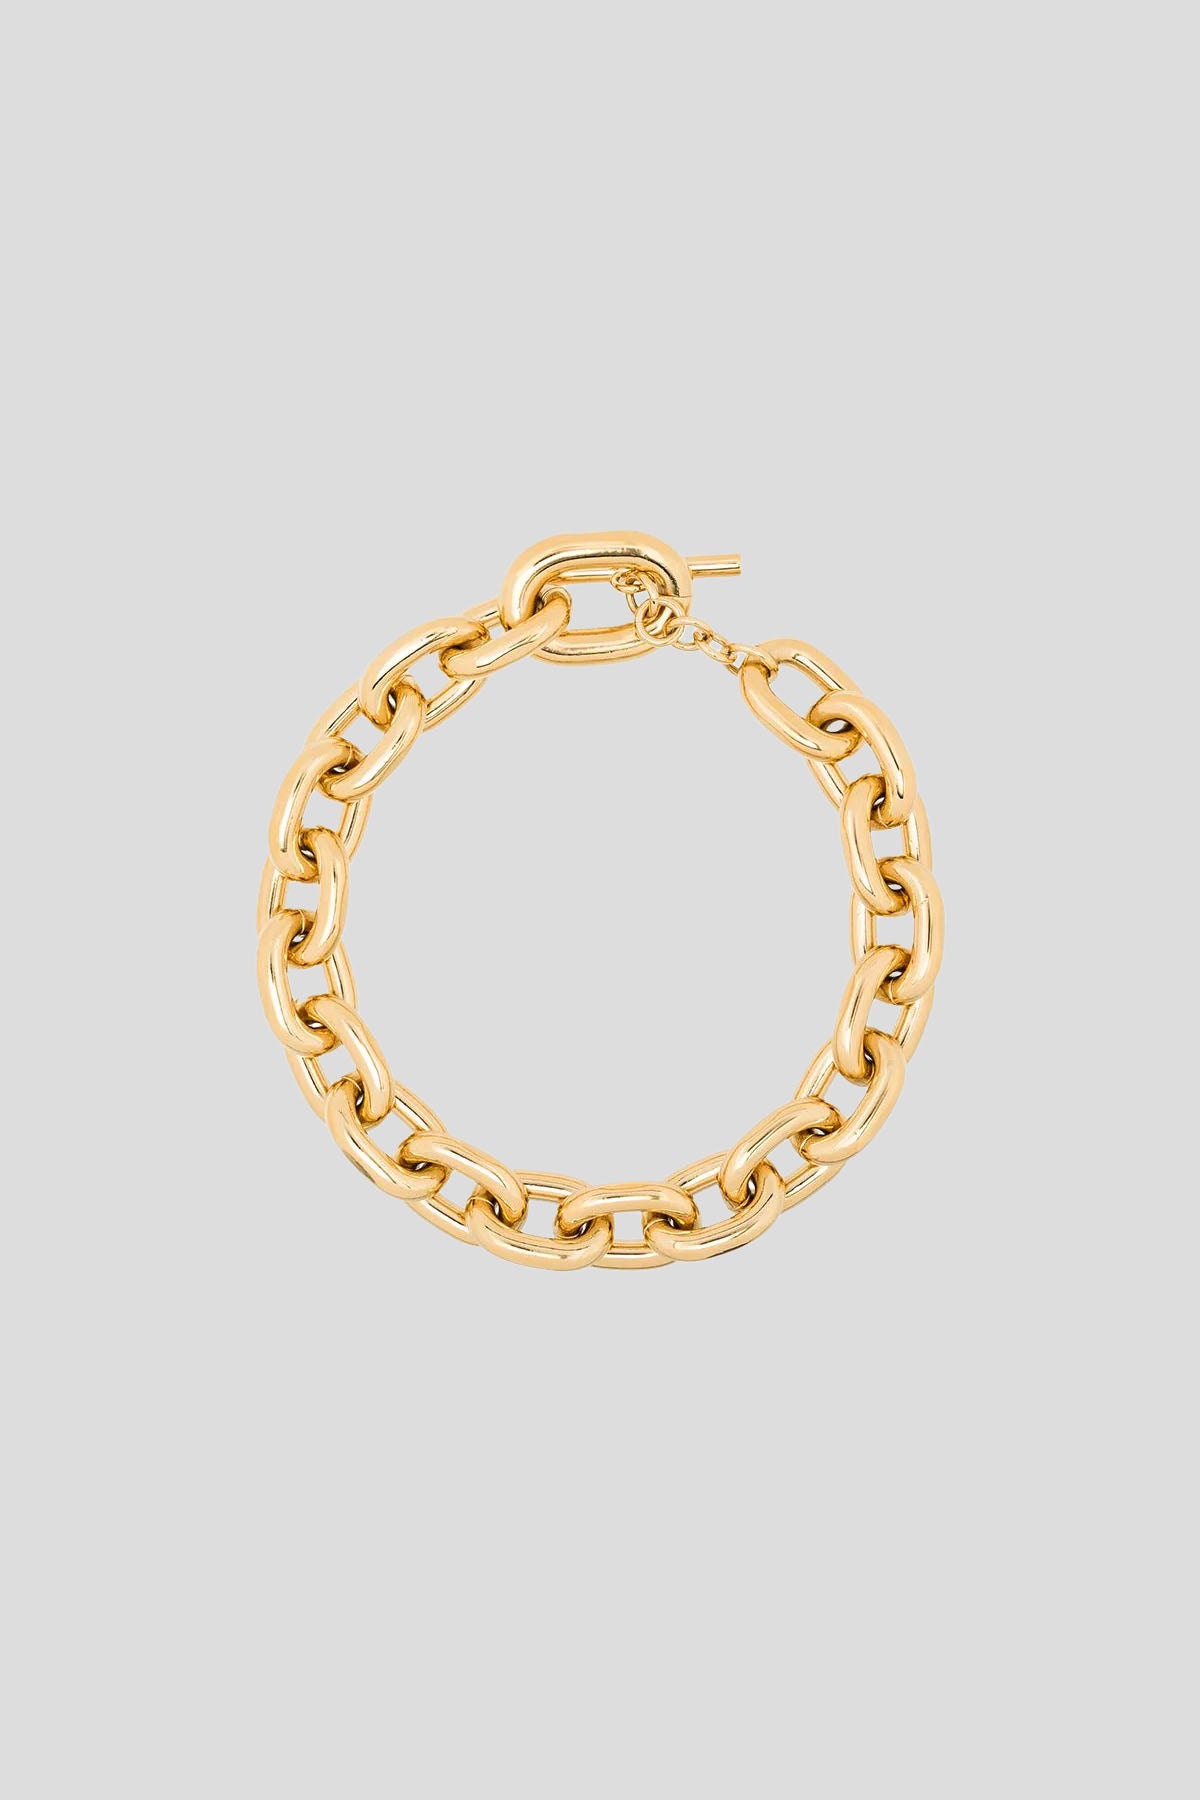 Rabanne - COLLIER XL LINK OR - LE LABO STORE